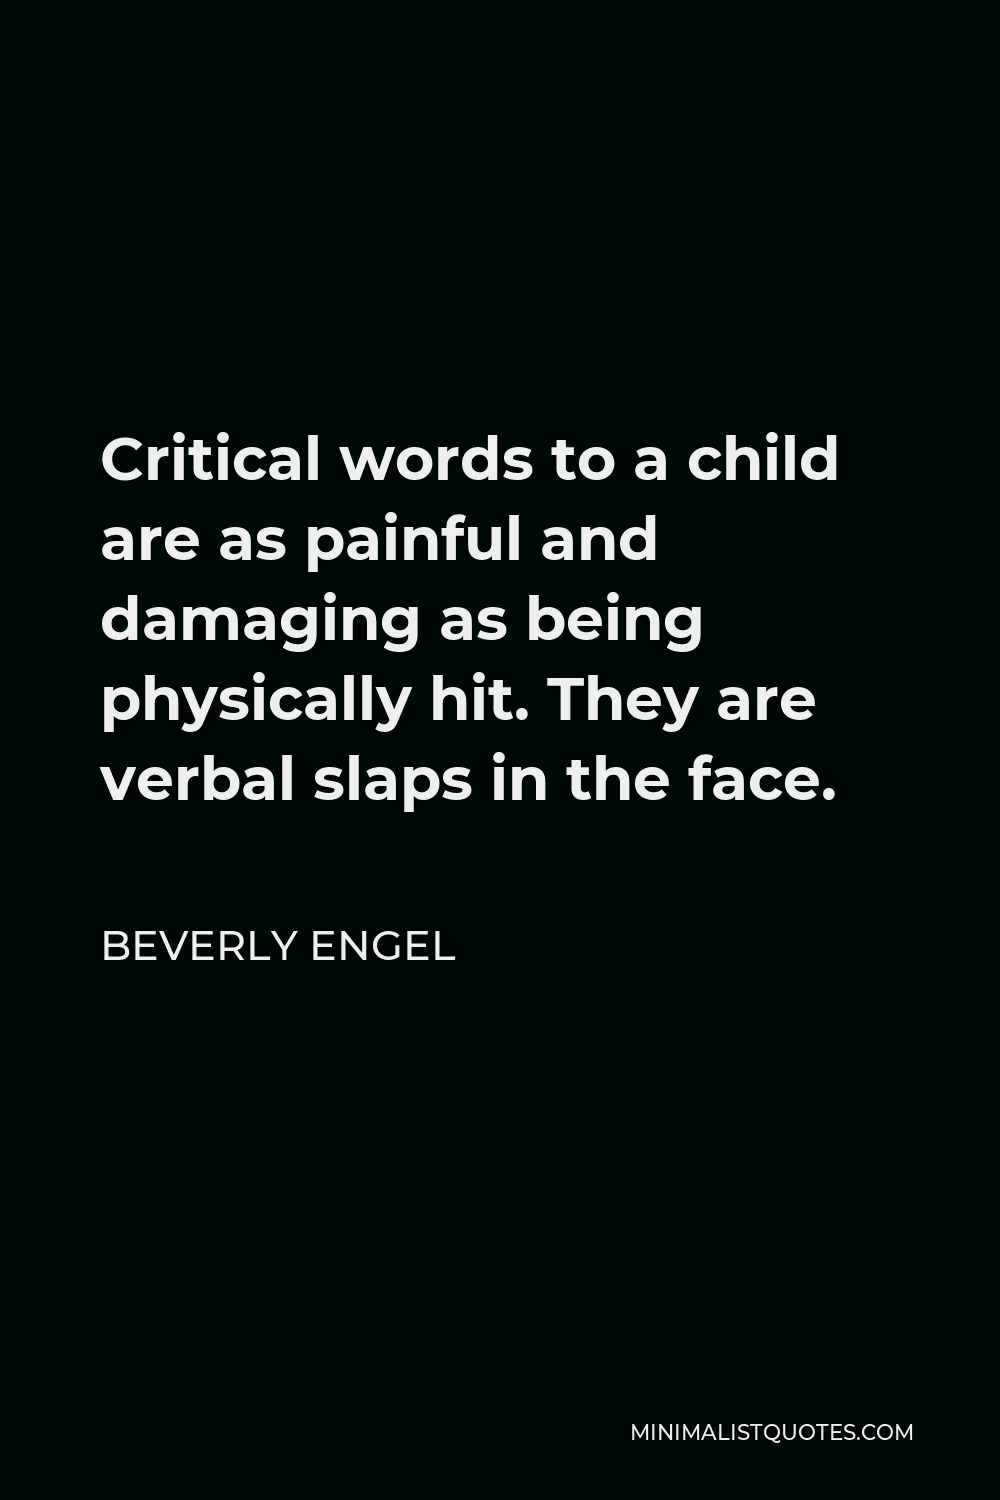 Beverly Engel Quote - Critical words to a child are as painful and damaging as being physically hit. They are verbal slaps in the face.